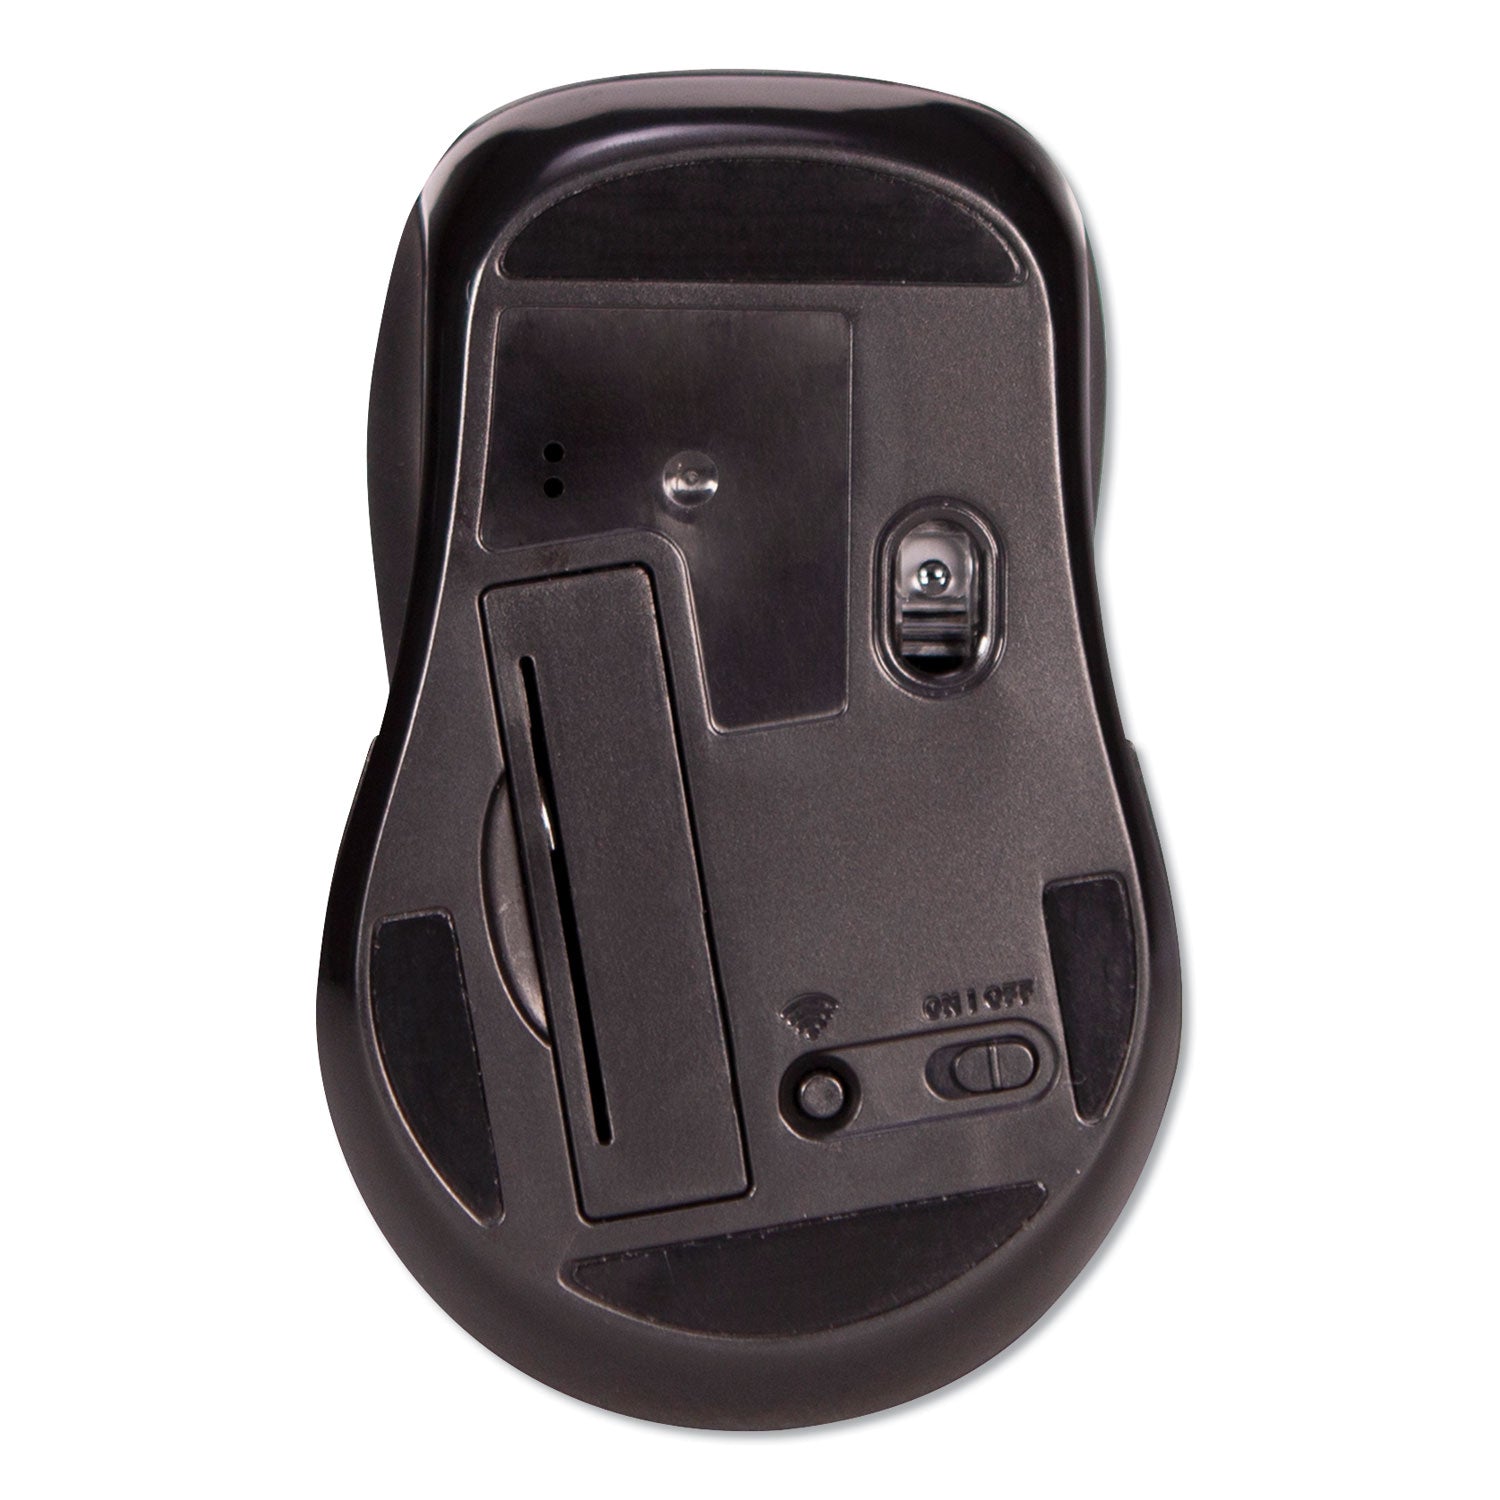 mid-size-wireless-optical-mouse-with-micro-usb-24-ghz-frequency-26-ft-wireless-range-right-hand-use-black_ivr61500 - 5